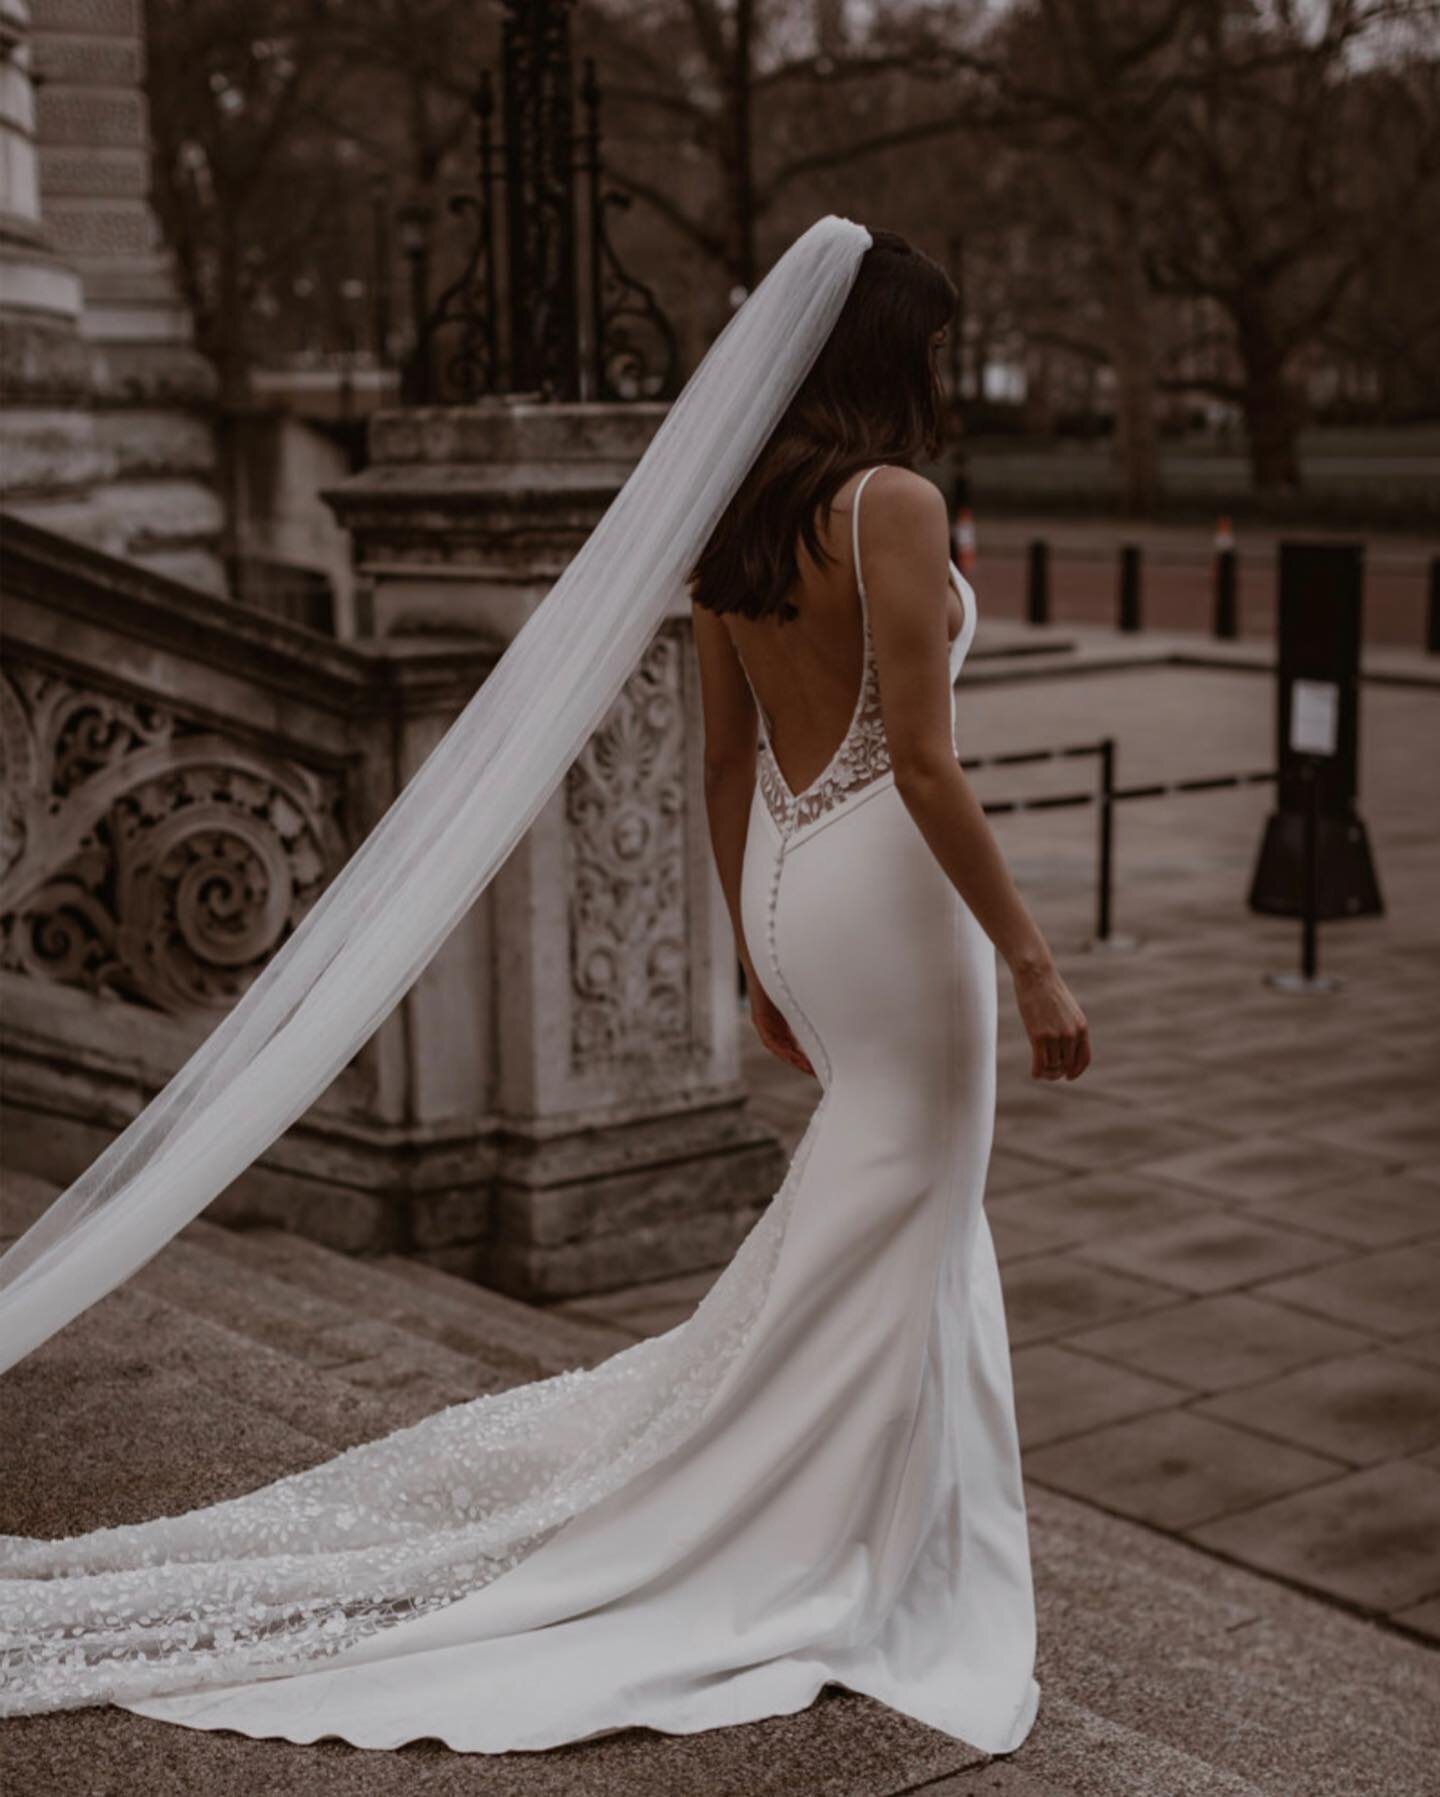 V A L L E Y 

Her fitted silhouette &amp; show stopping low back have stolen my heart 🤩

Click the link in bio to try her on @perlanovabridal 

#mwlvalley by @madewithlovebridal
📸 by @patriciaandtrevor